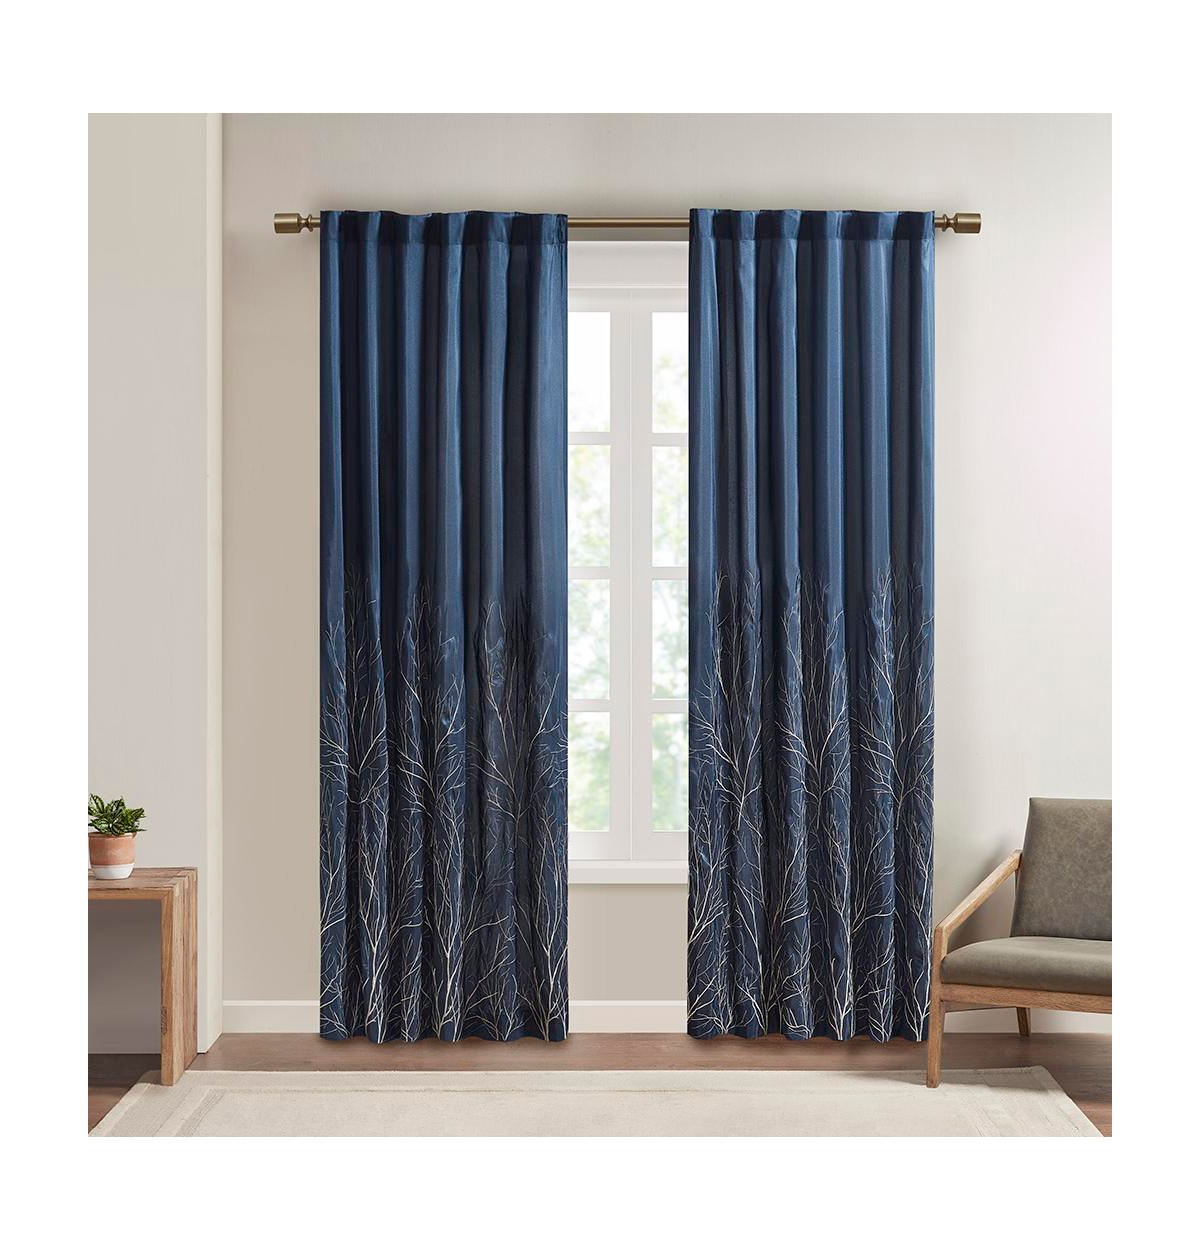 Andora Botanical Embroidered Curtain Panel, 50"W x 84"L - Navy